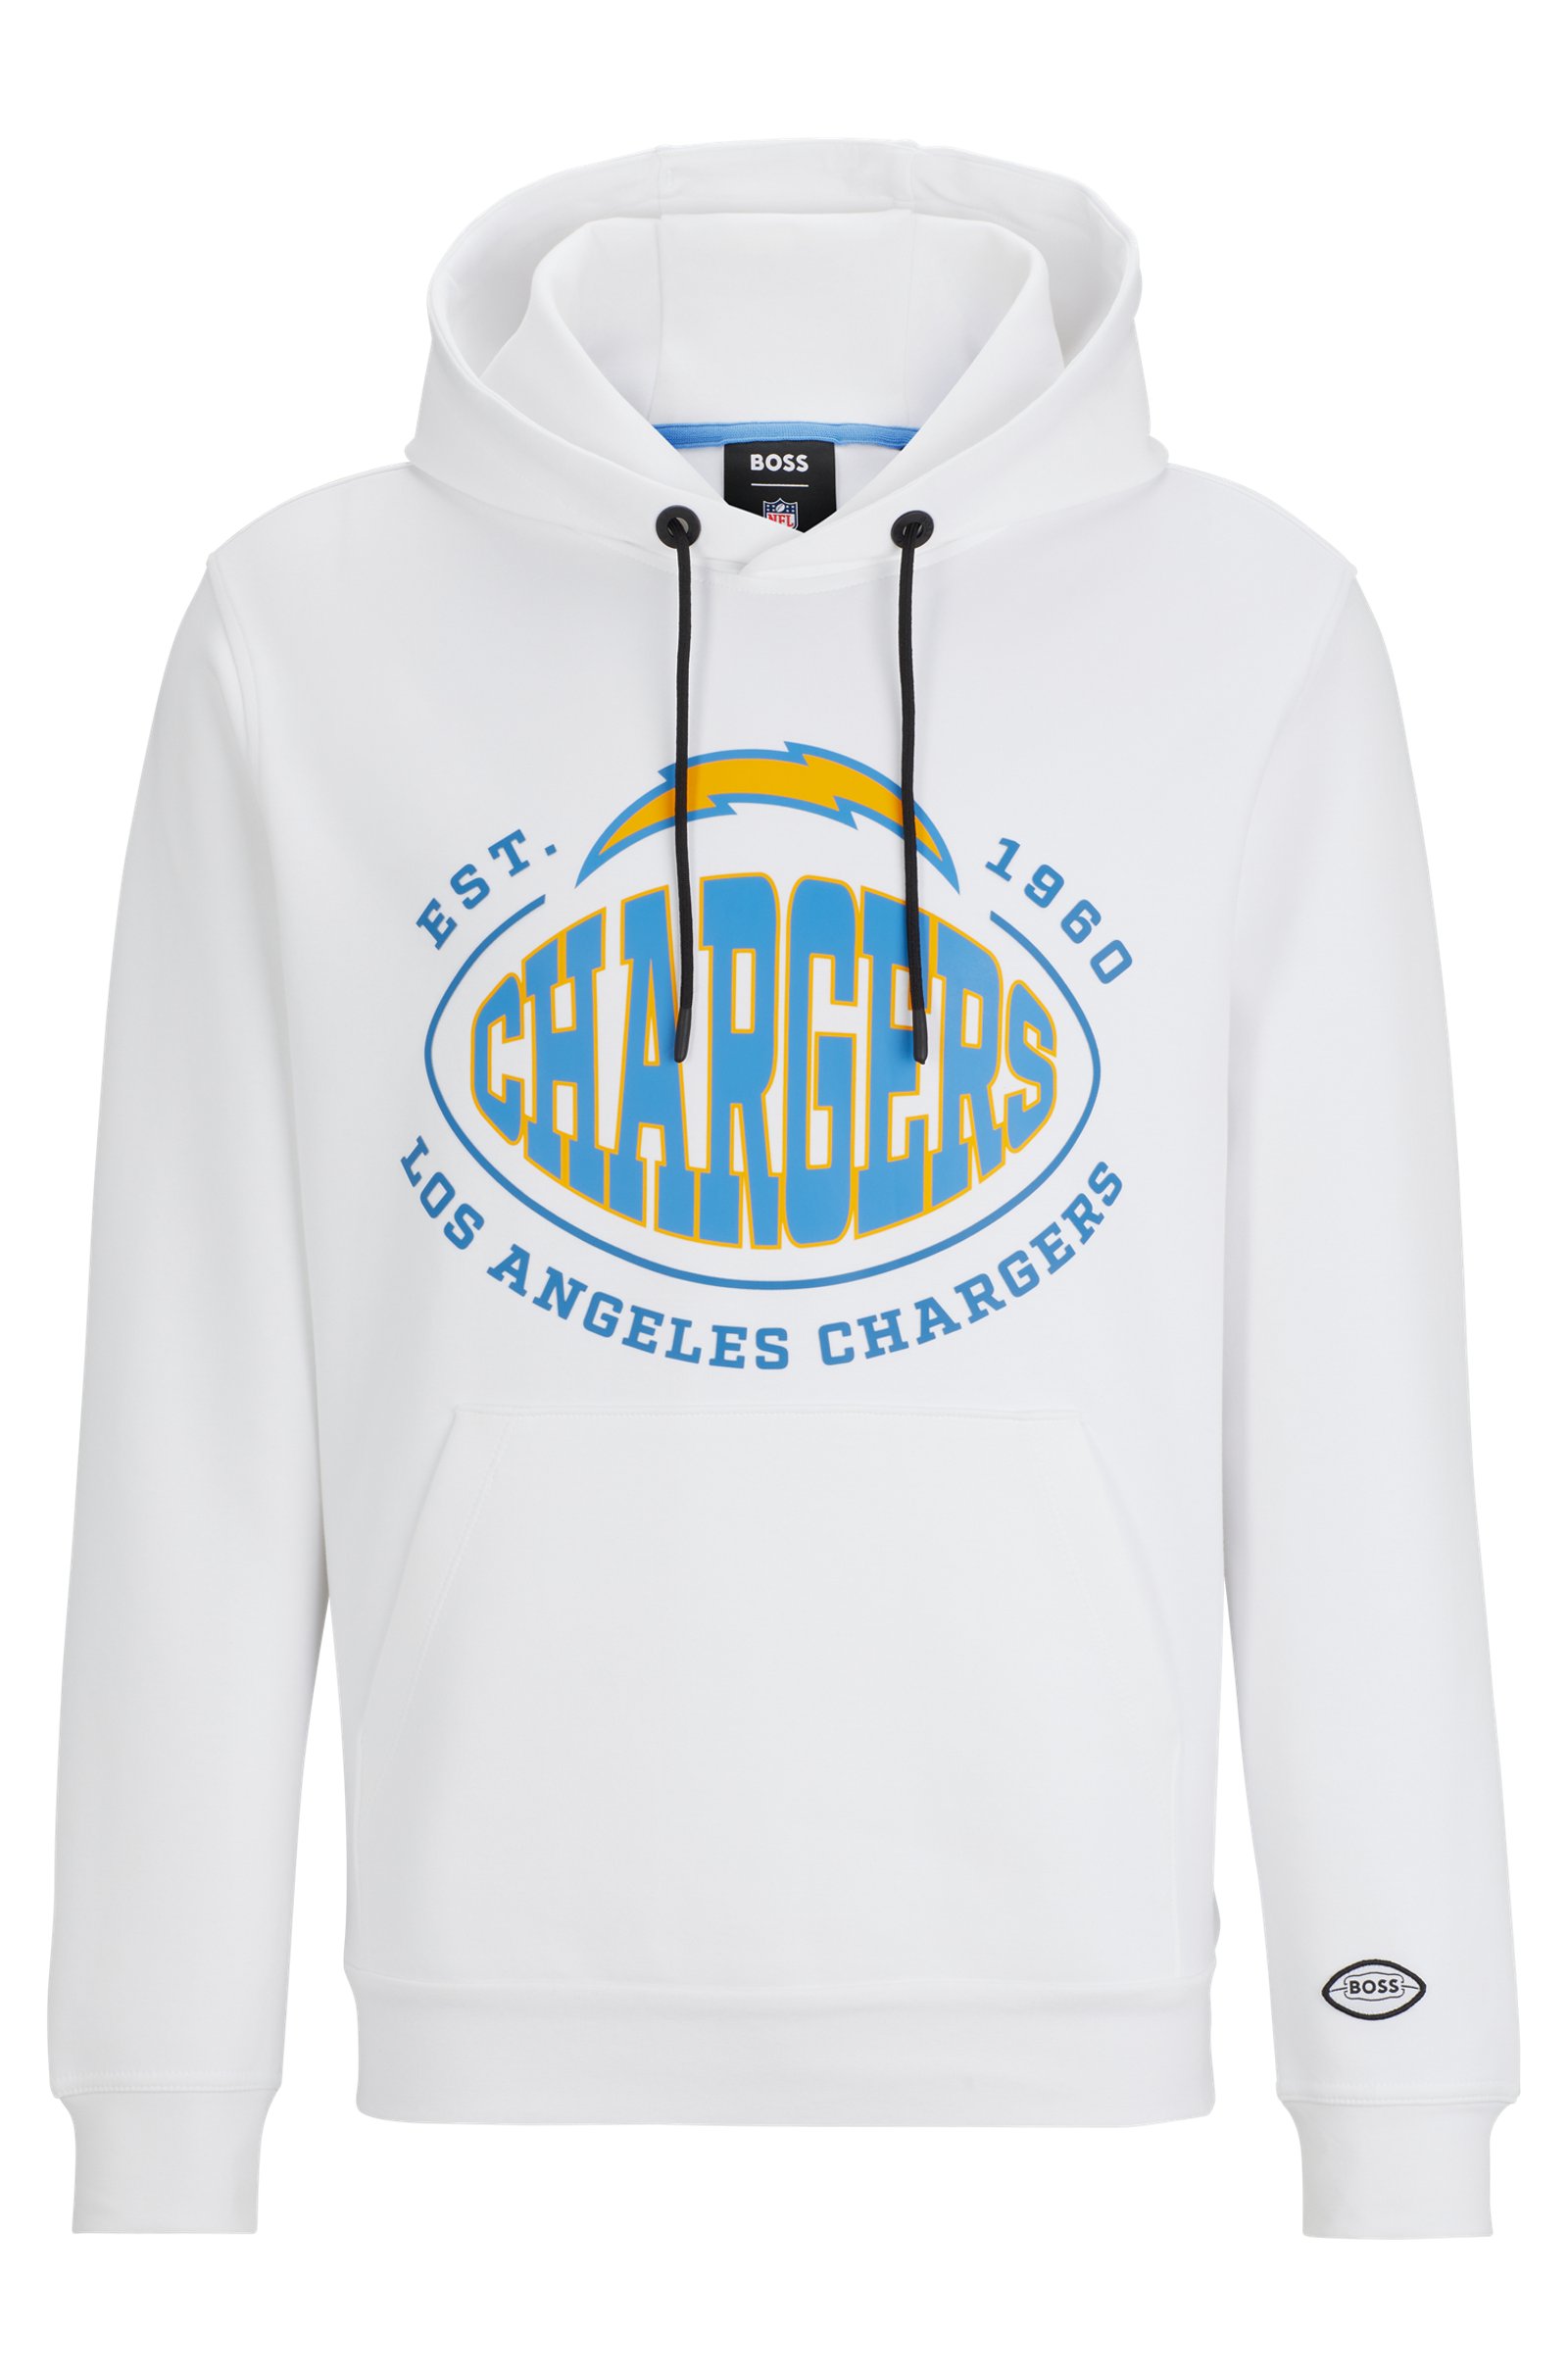 Толстовка Boss X Nfl Cotton-blend With Collaborative Branding, Chargers